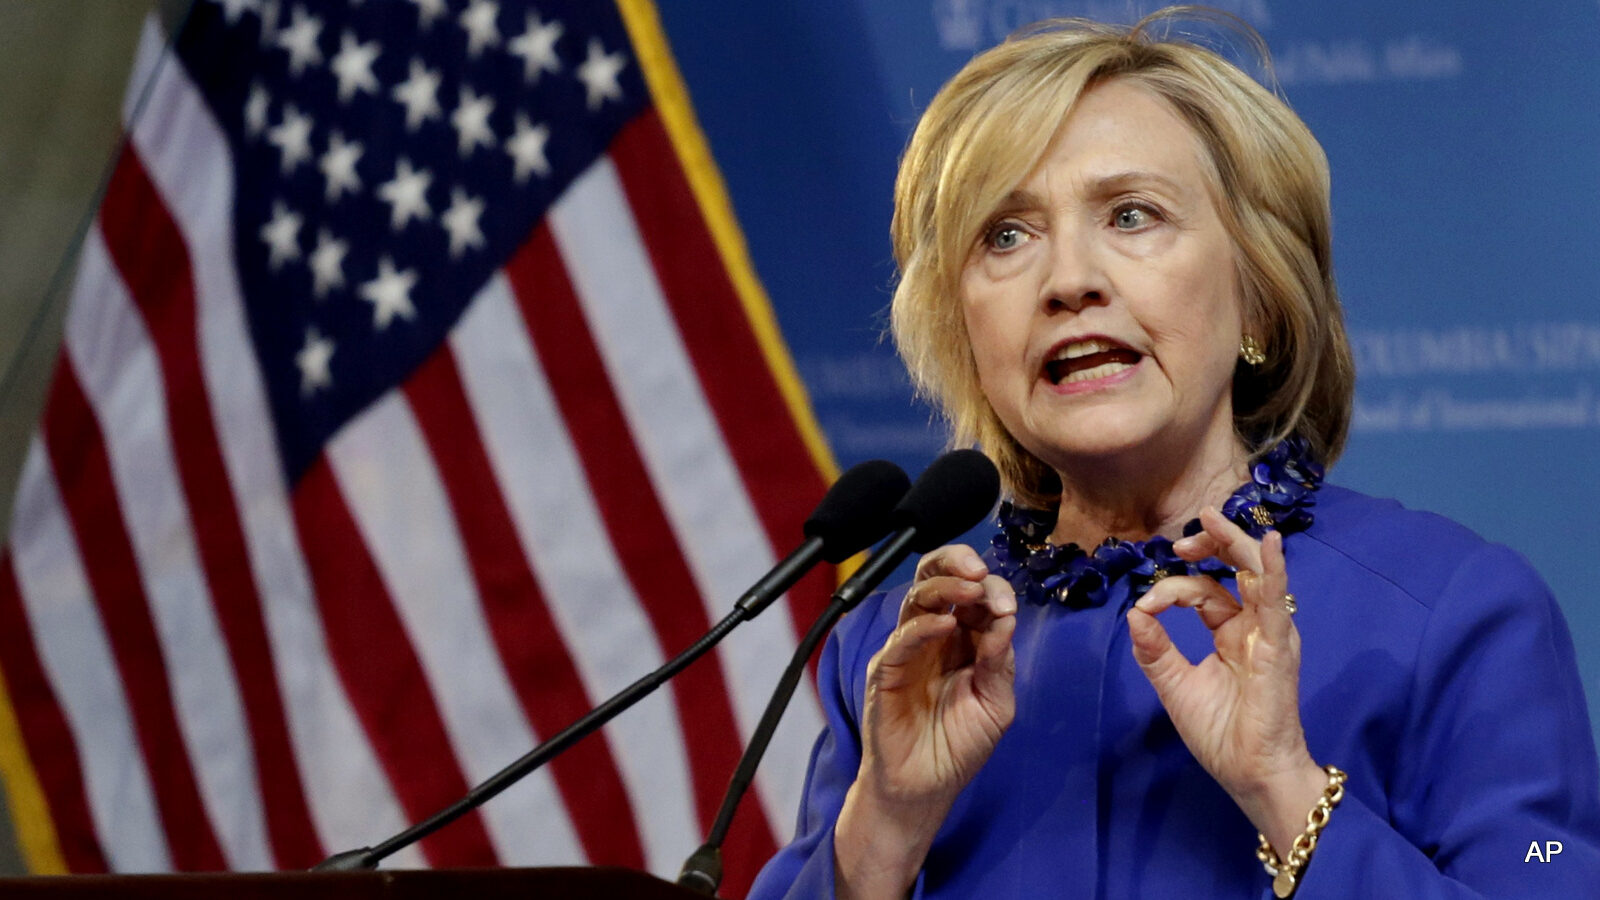 Hillary Rodham Clinton, a 2016 Democratic presidential contender, speaks at the David N. Dinkins Leadership and Public Policy Forum, Wednesday, April 29, 2015 in New York.